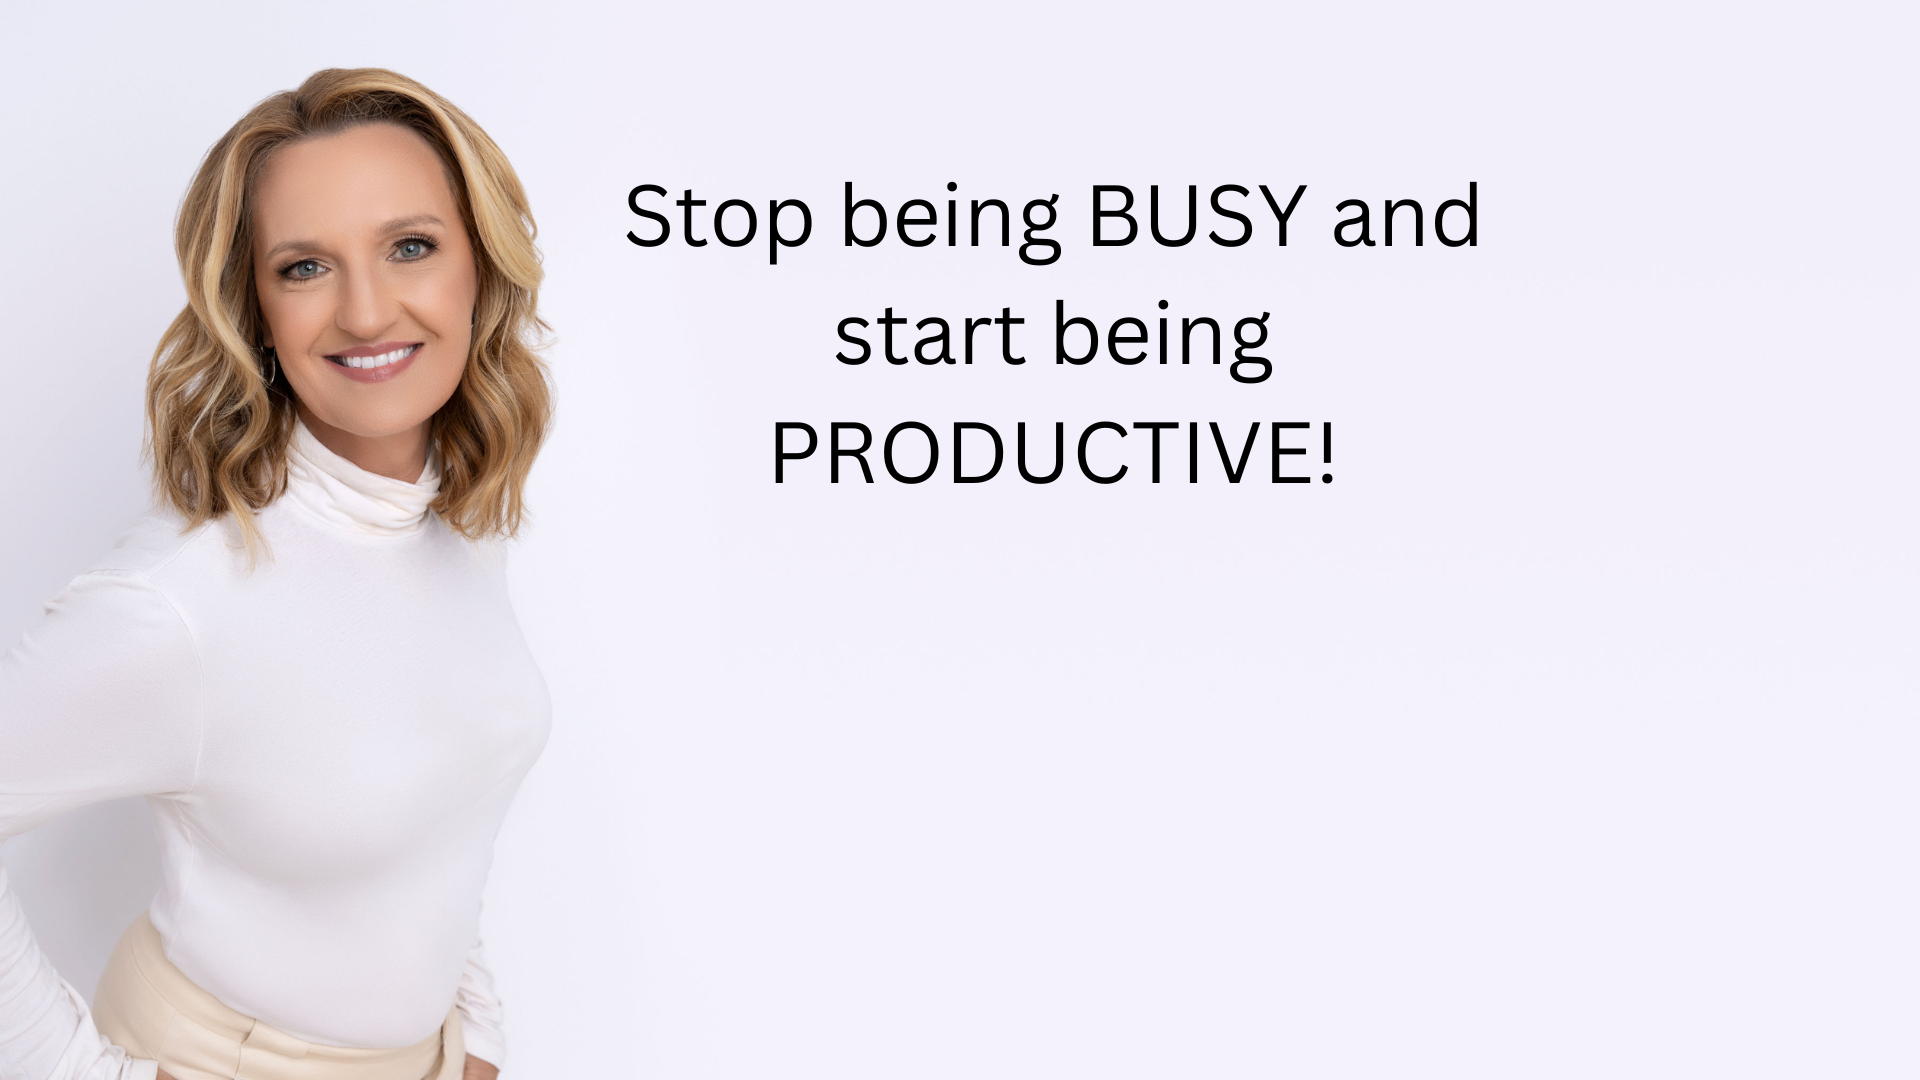 Start being productive